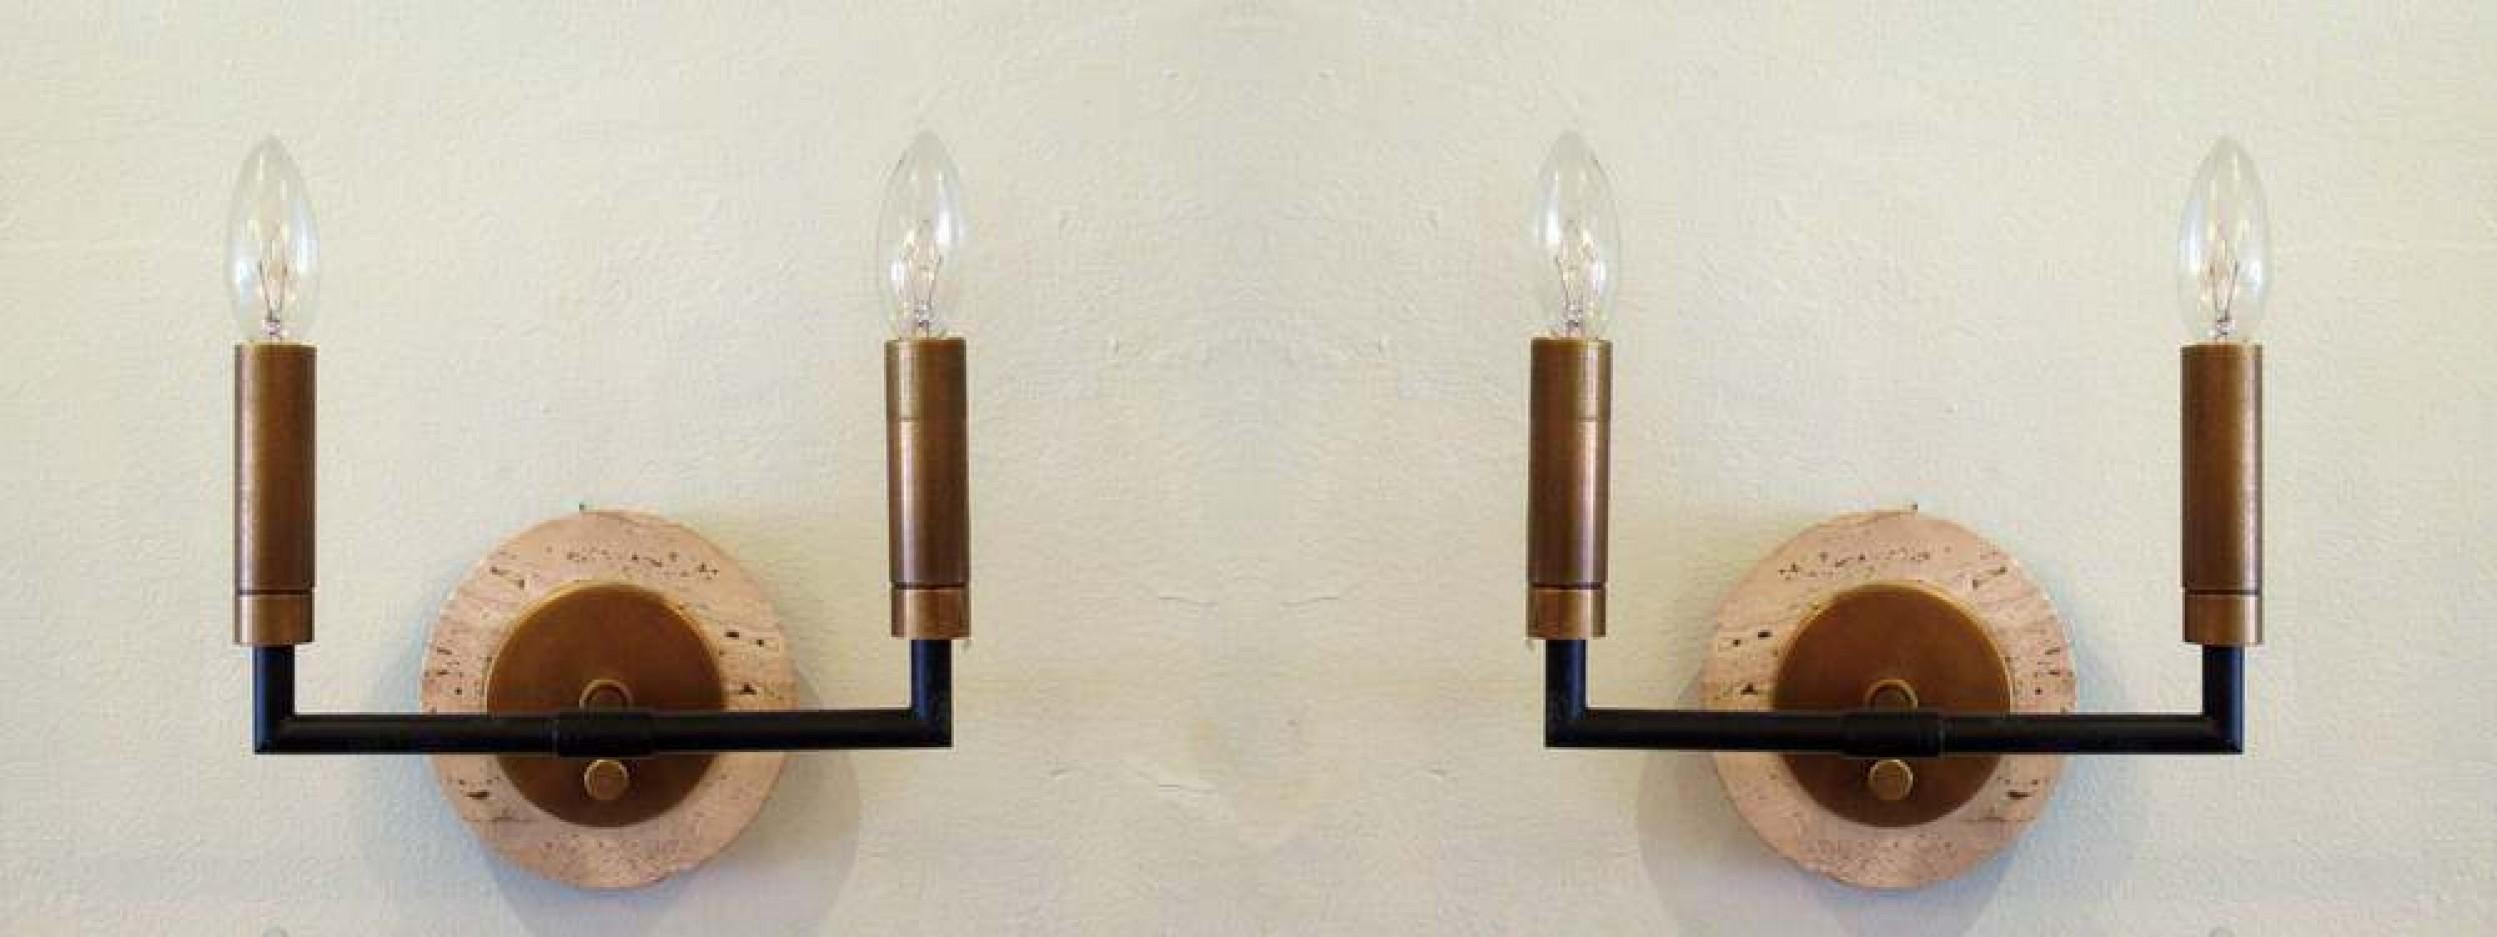 Pair of Midcentury Italian Modern Metal and Travertine Wall Sconces For Sale 3